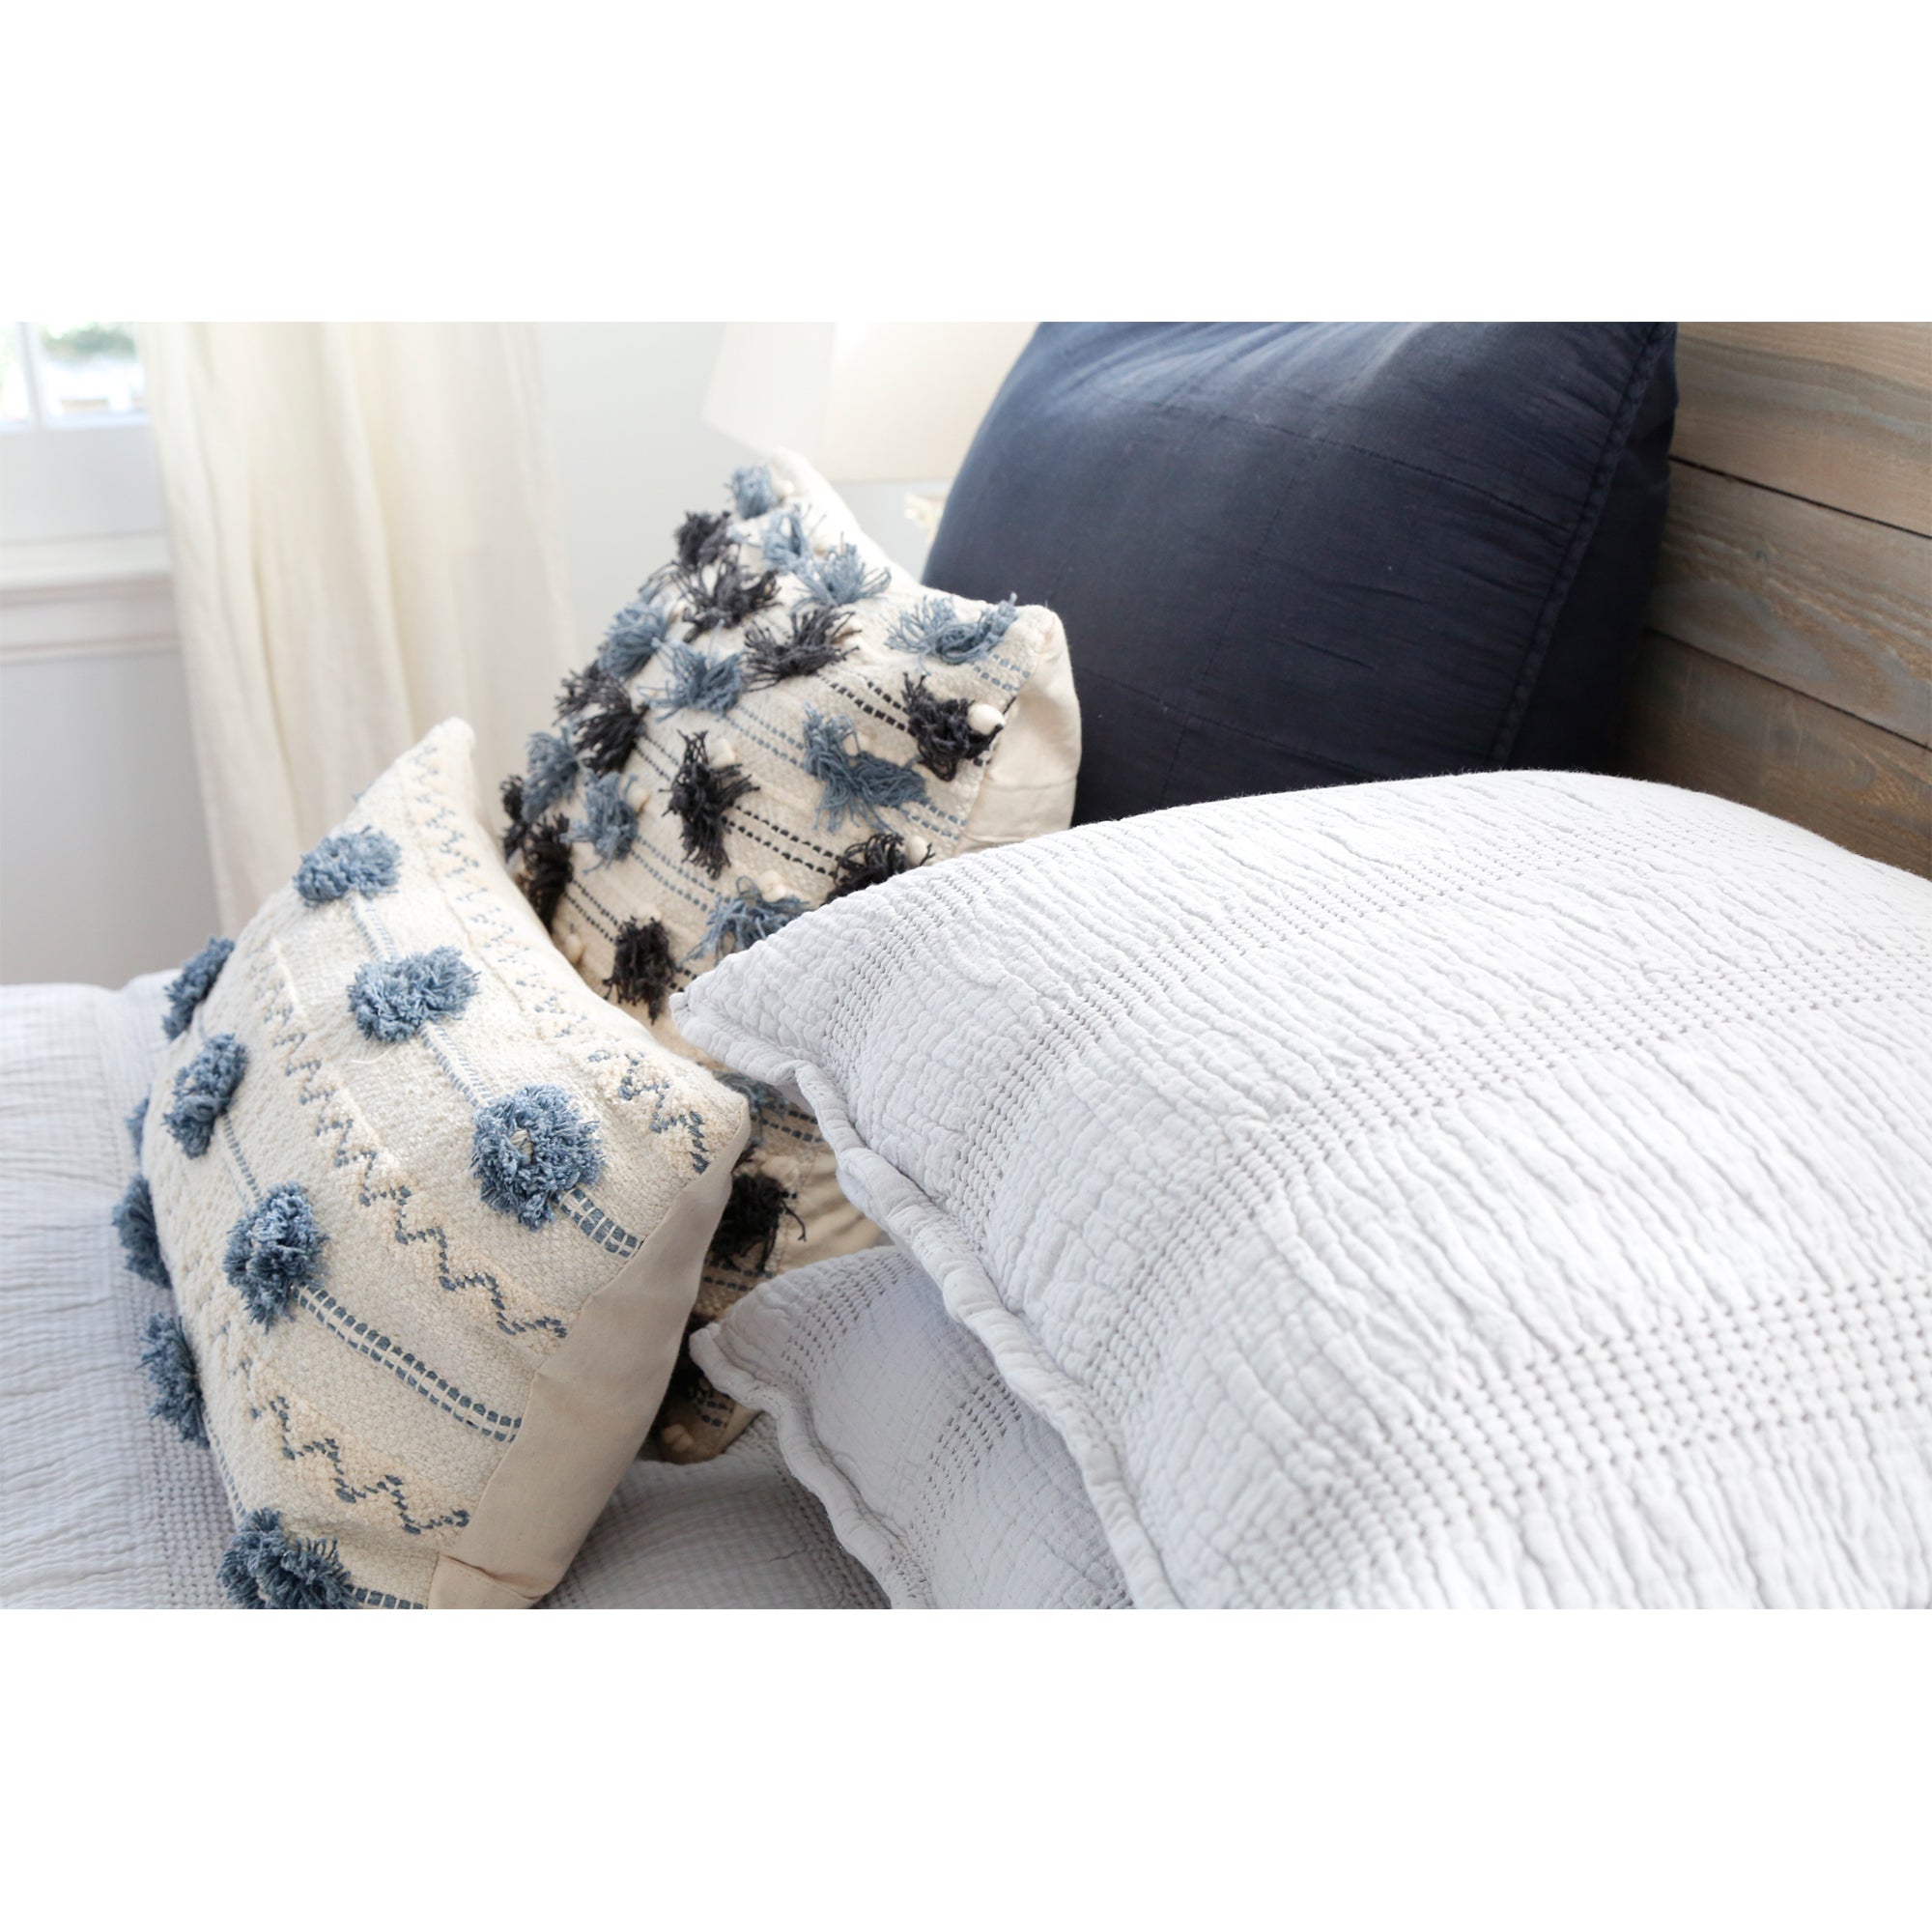 IZZY HAND WOVEN PILLOW 14" x 24" with insert-Pom Pom at Home